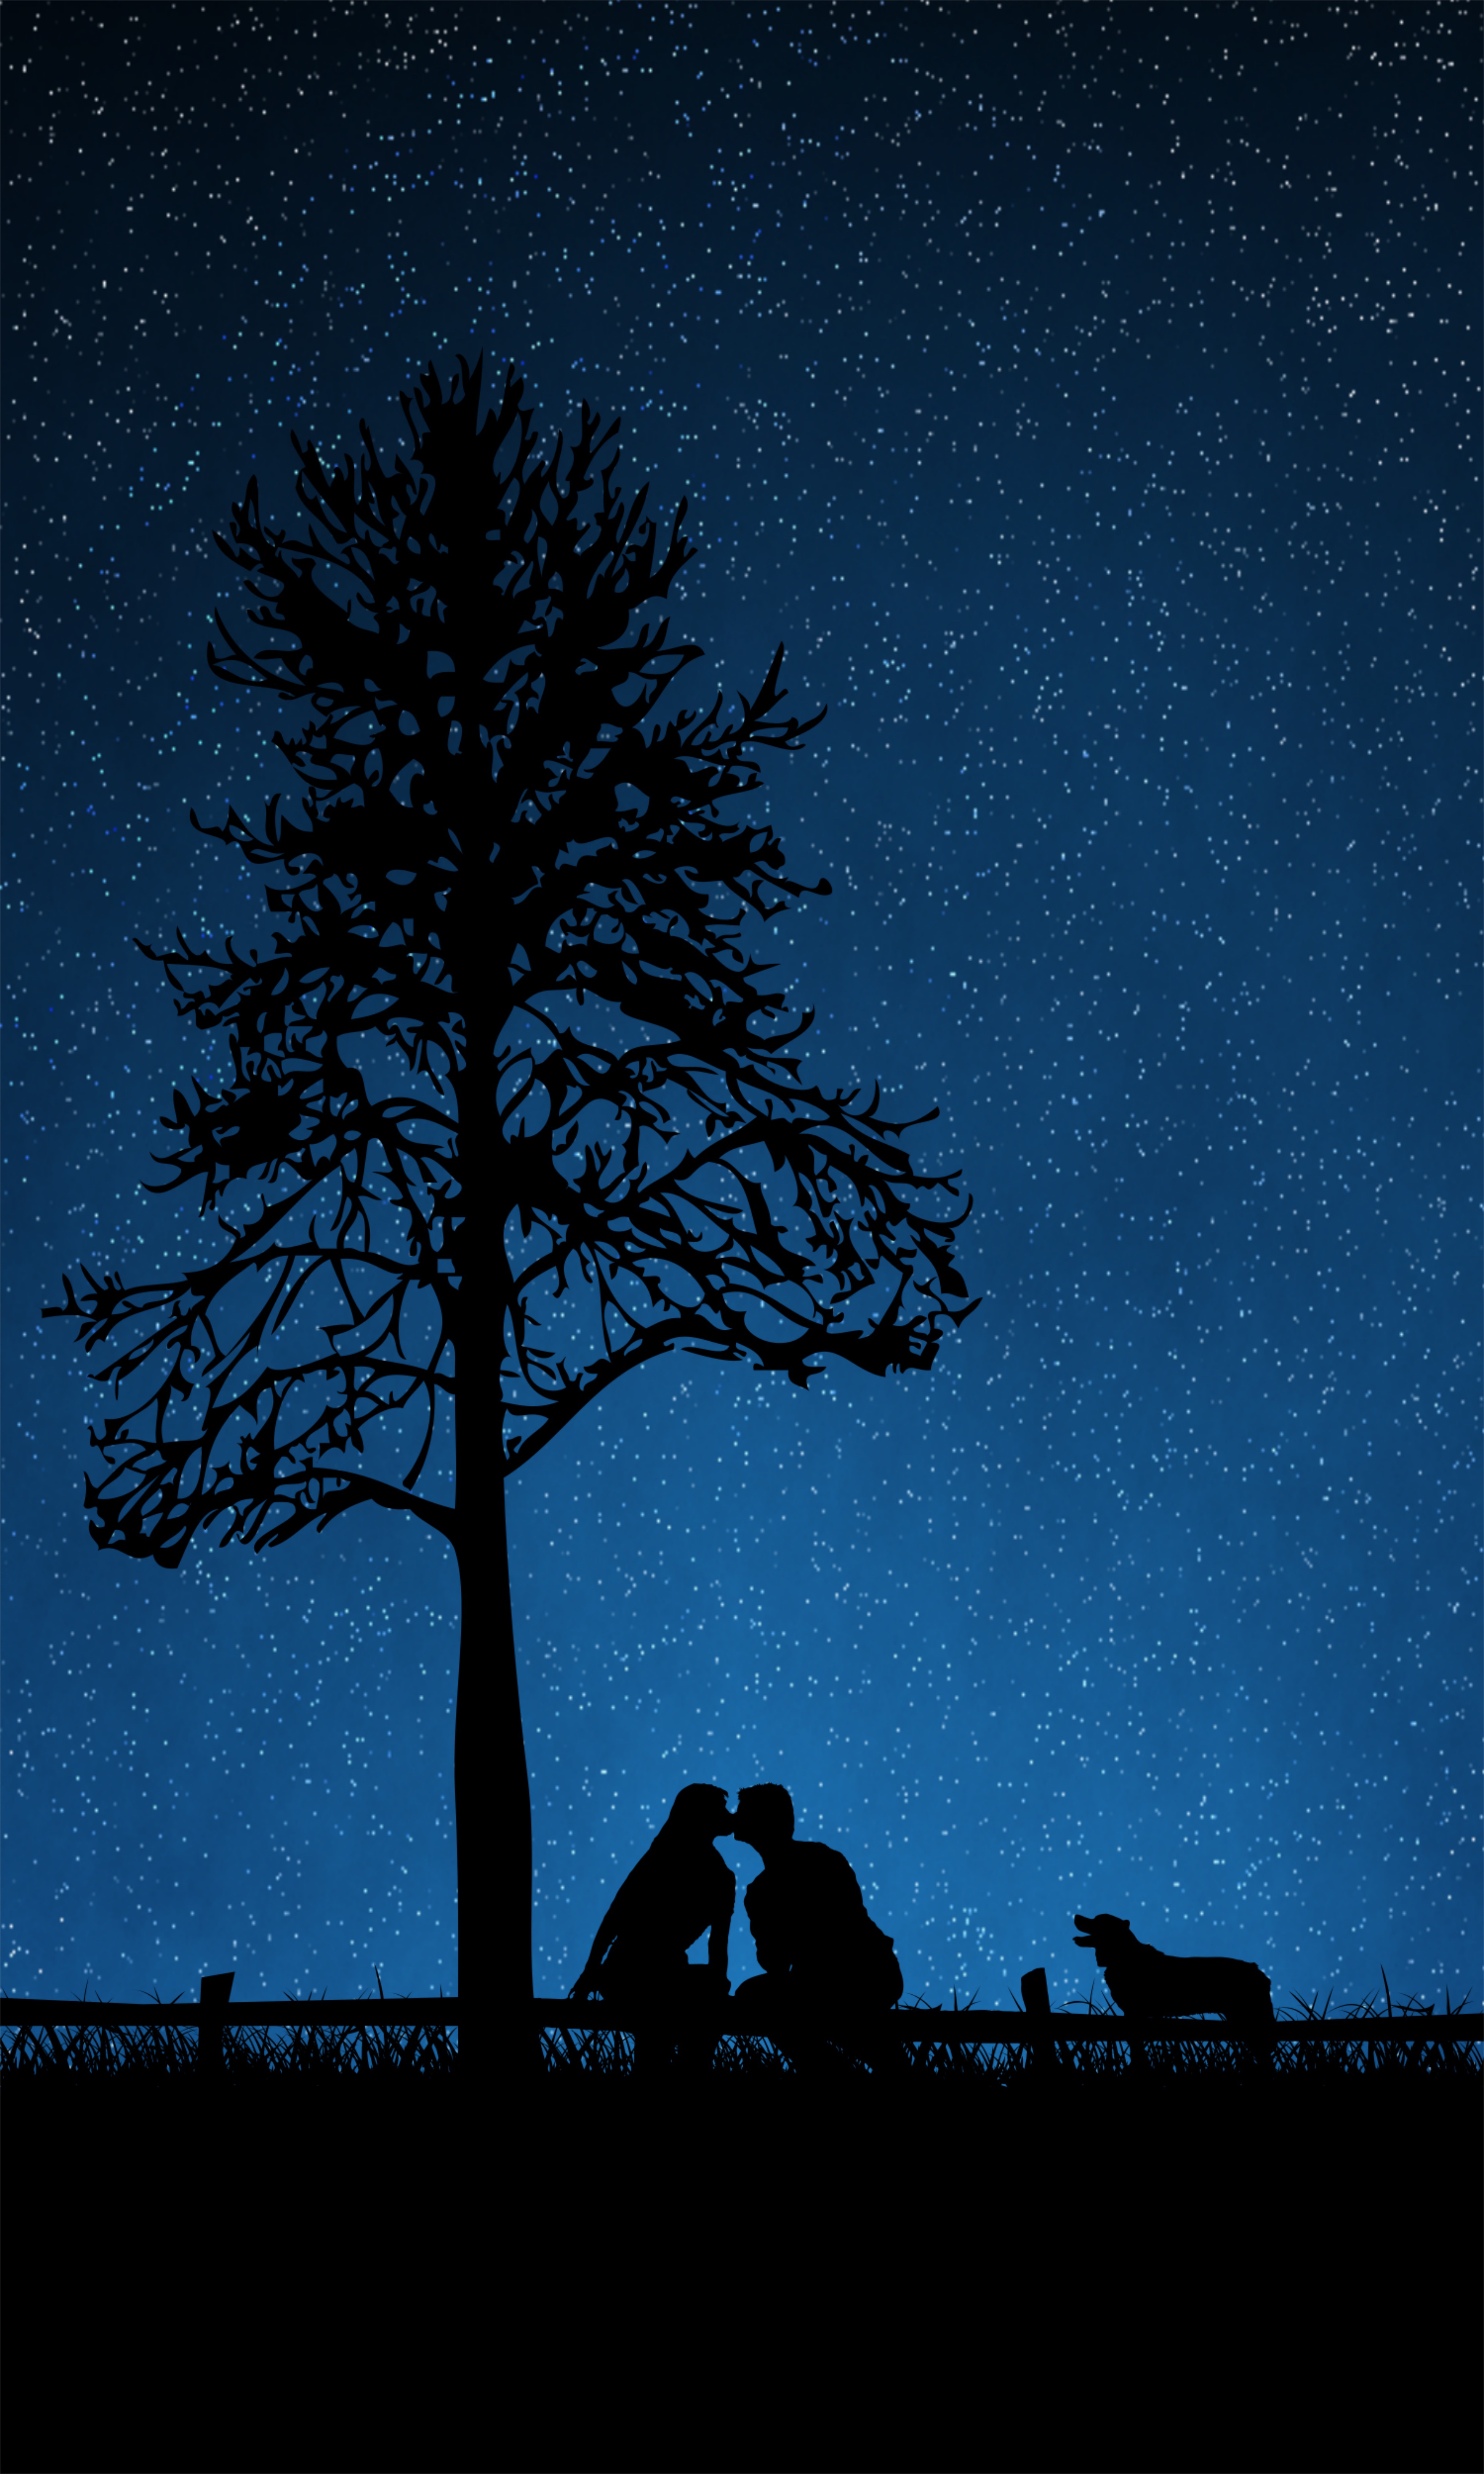 kiss, couple, pair, love, wood, tree, dog, silhouettes, starry sky cellphone